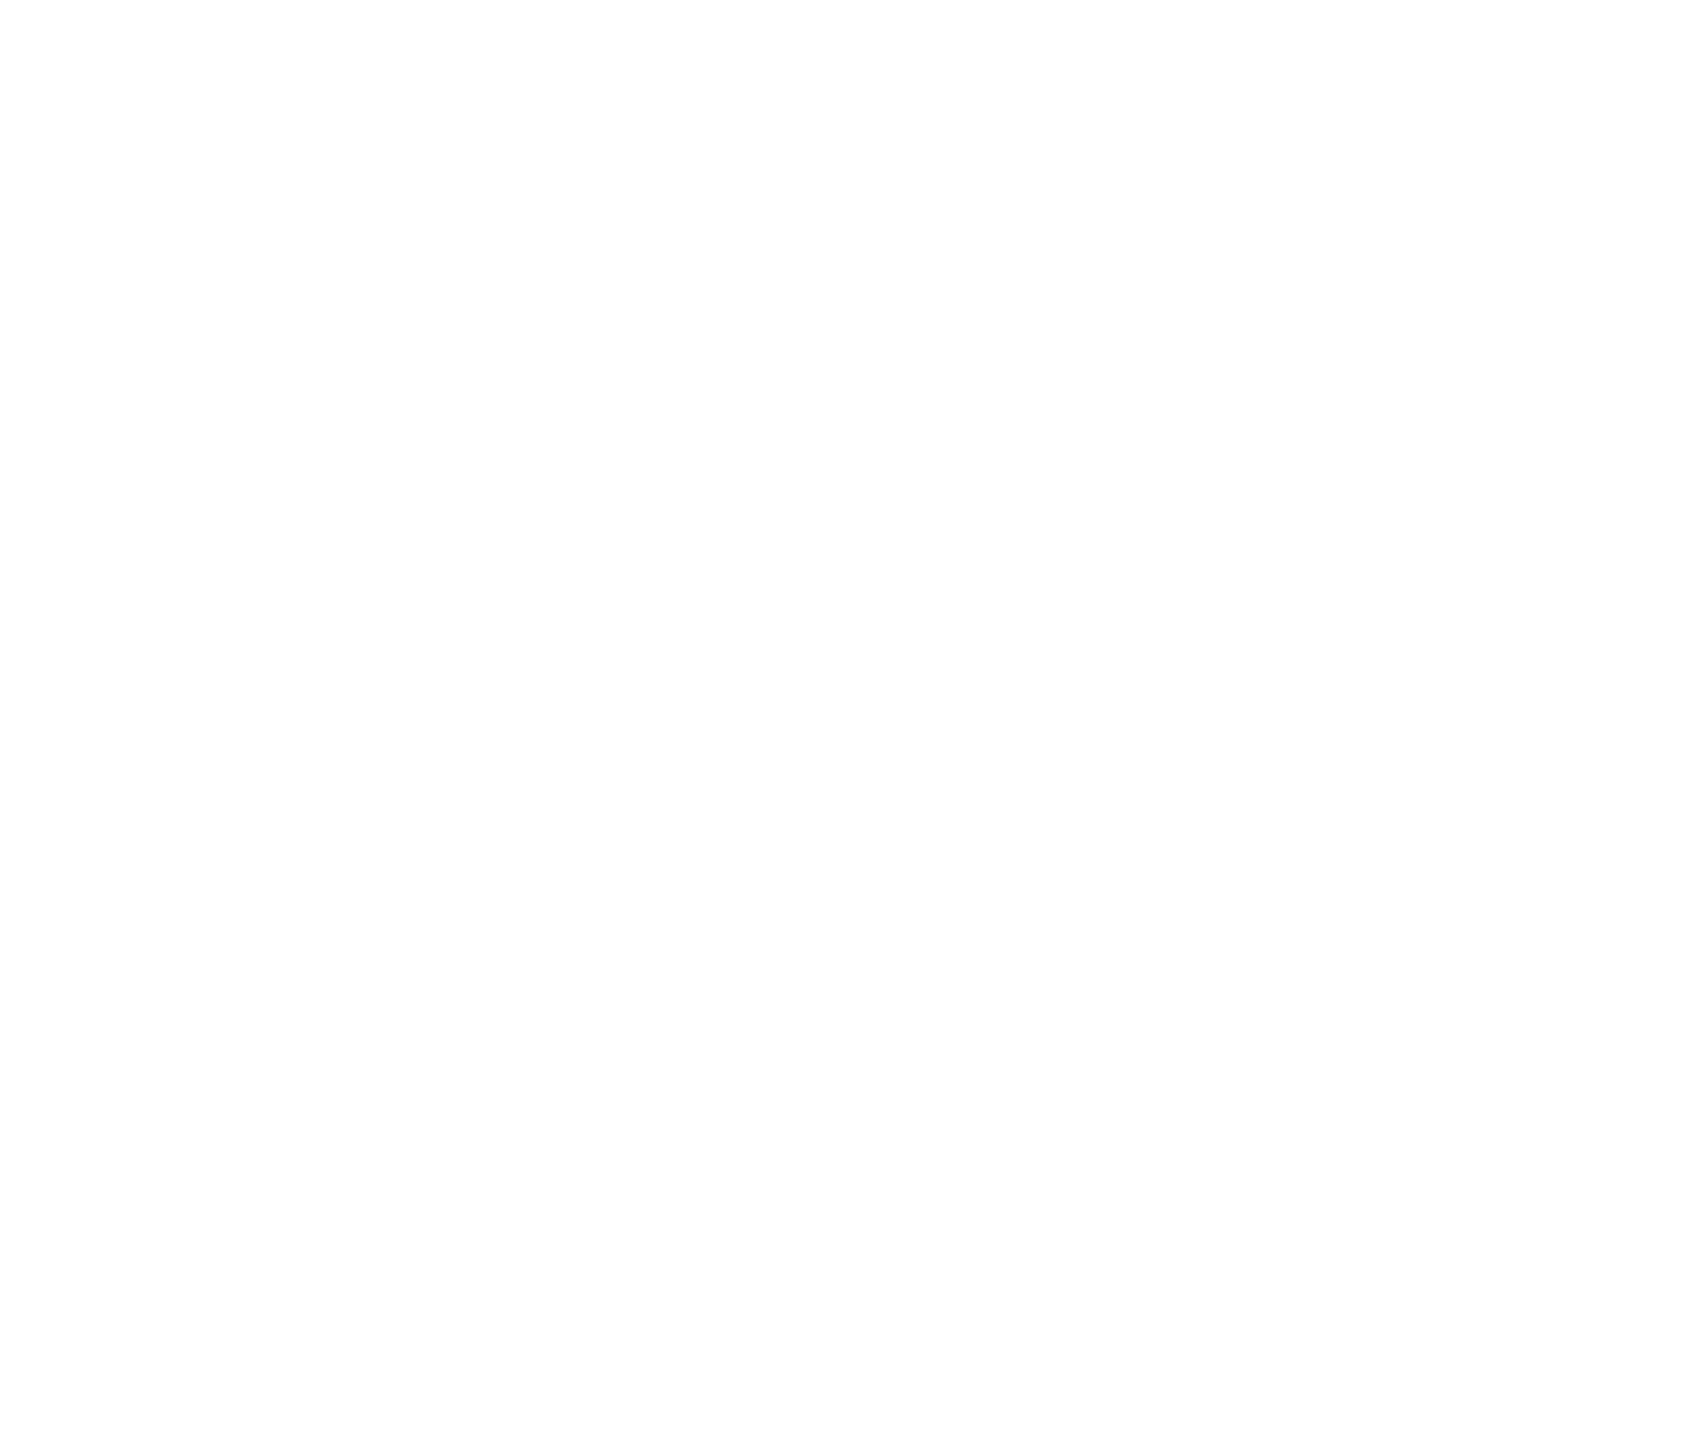 BLOOMS & BLOSSOMS